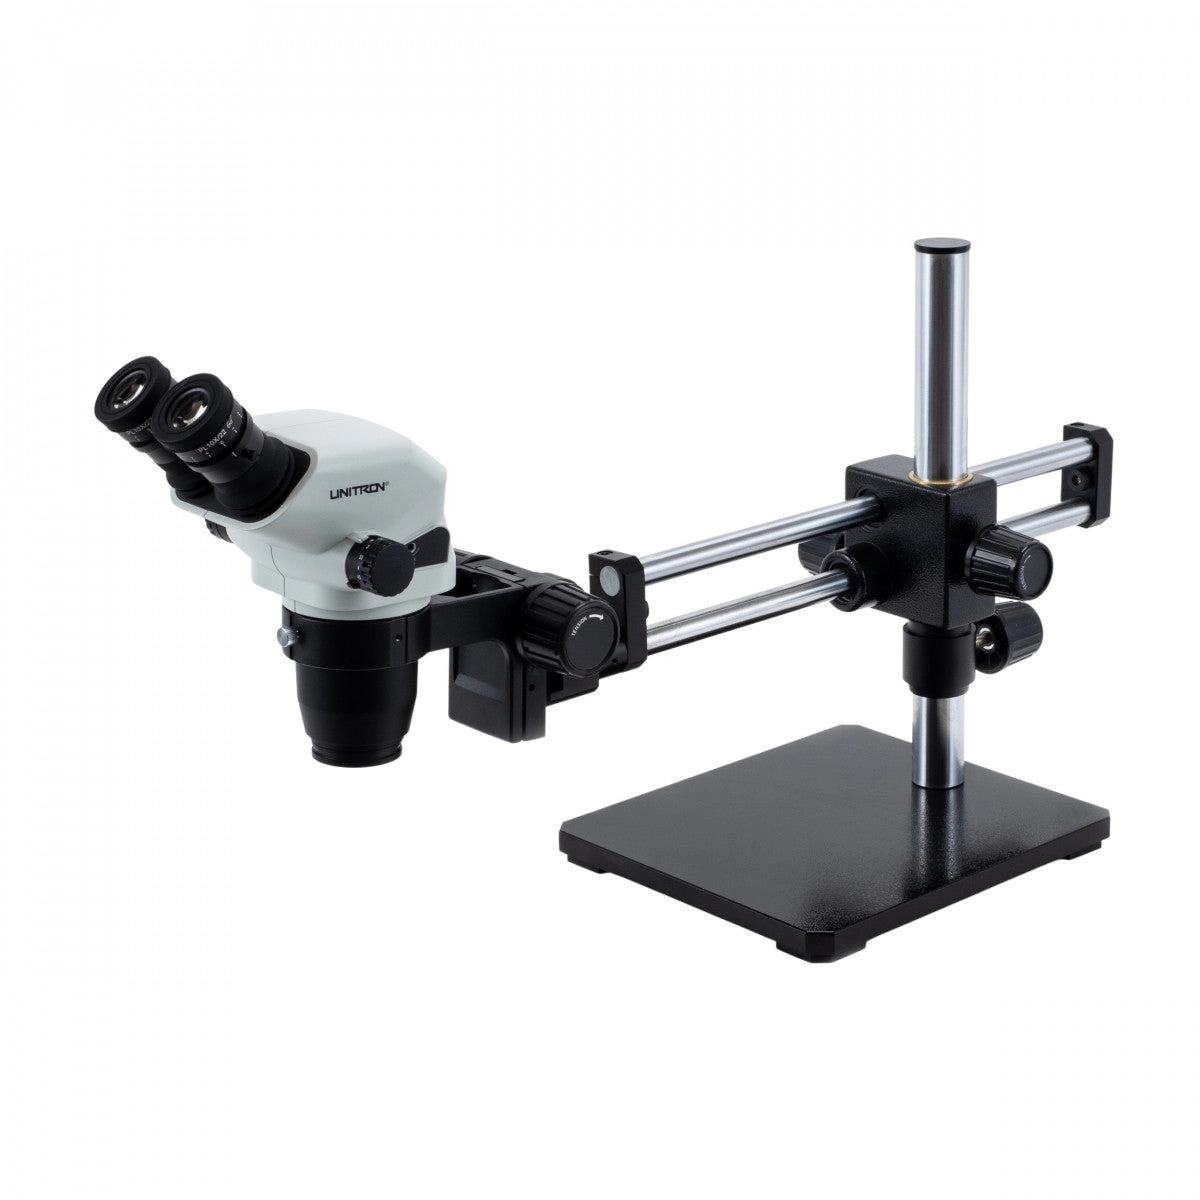 Unitron Z645 Zoom Stereo Microscope on Ball Bearing Boom Stand | Industrial